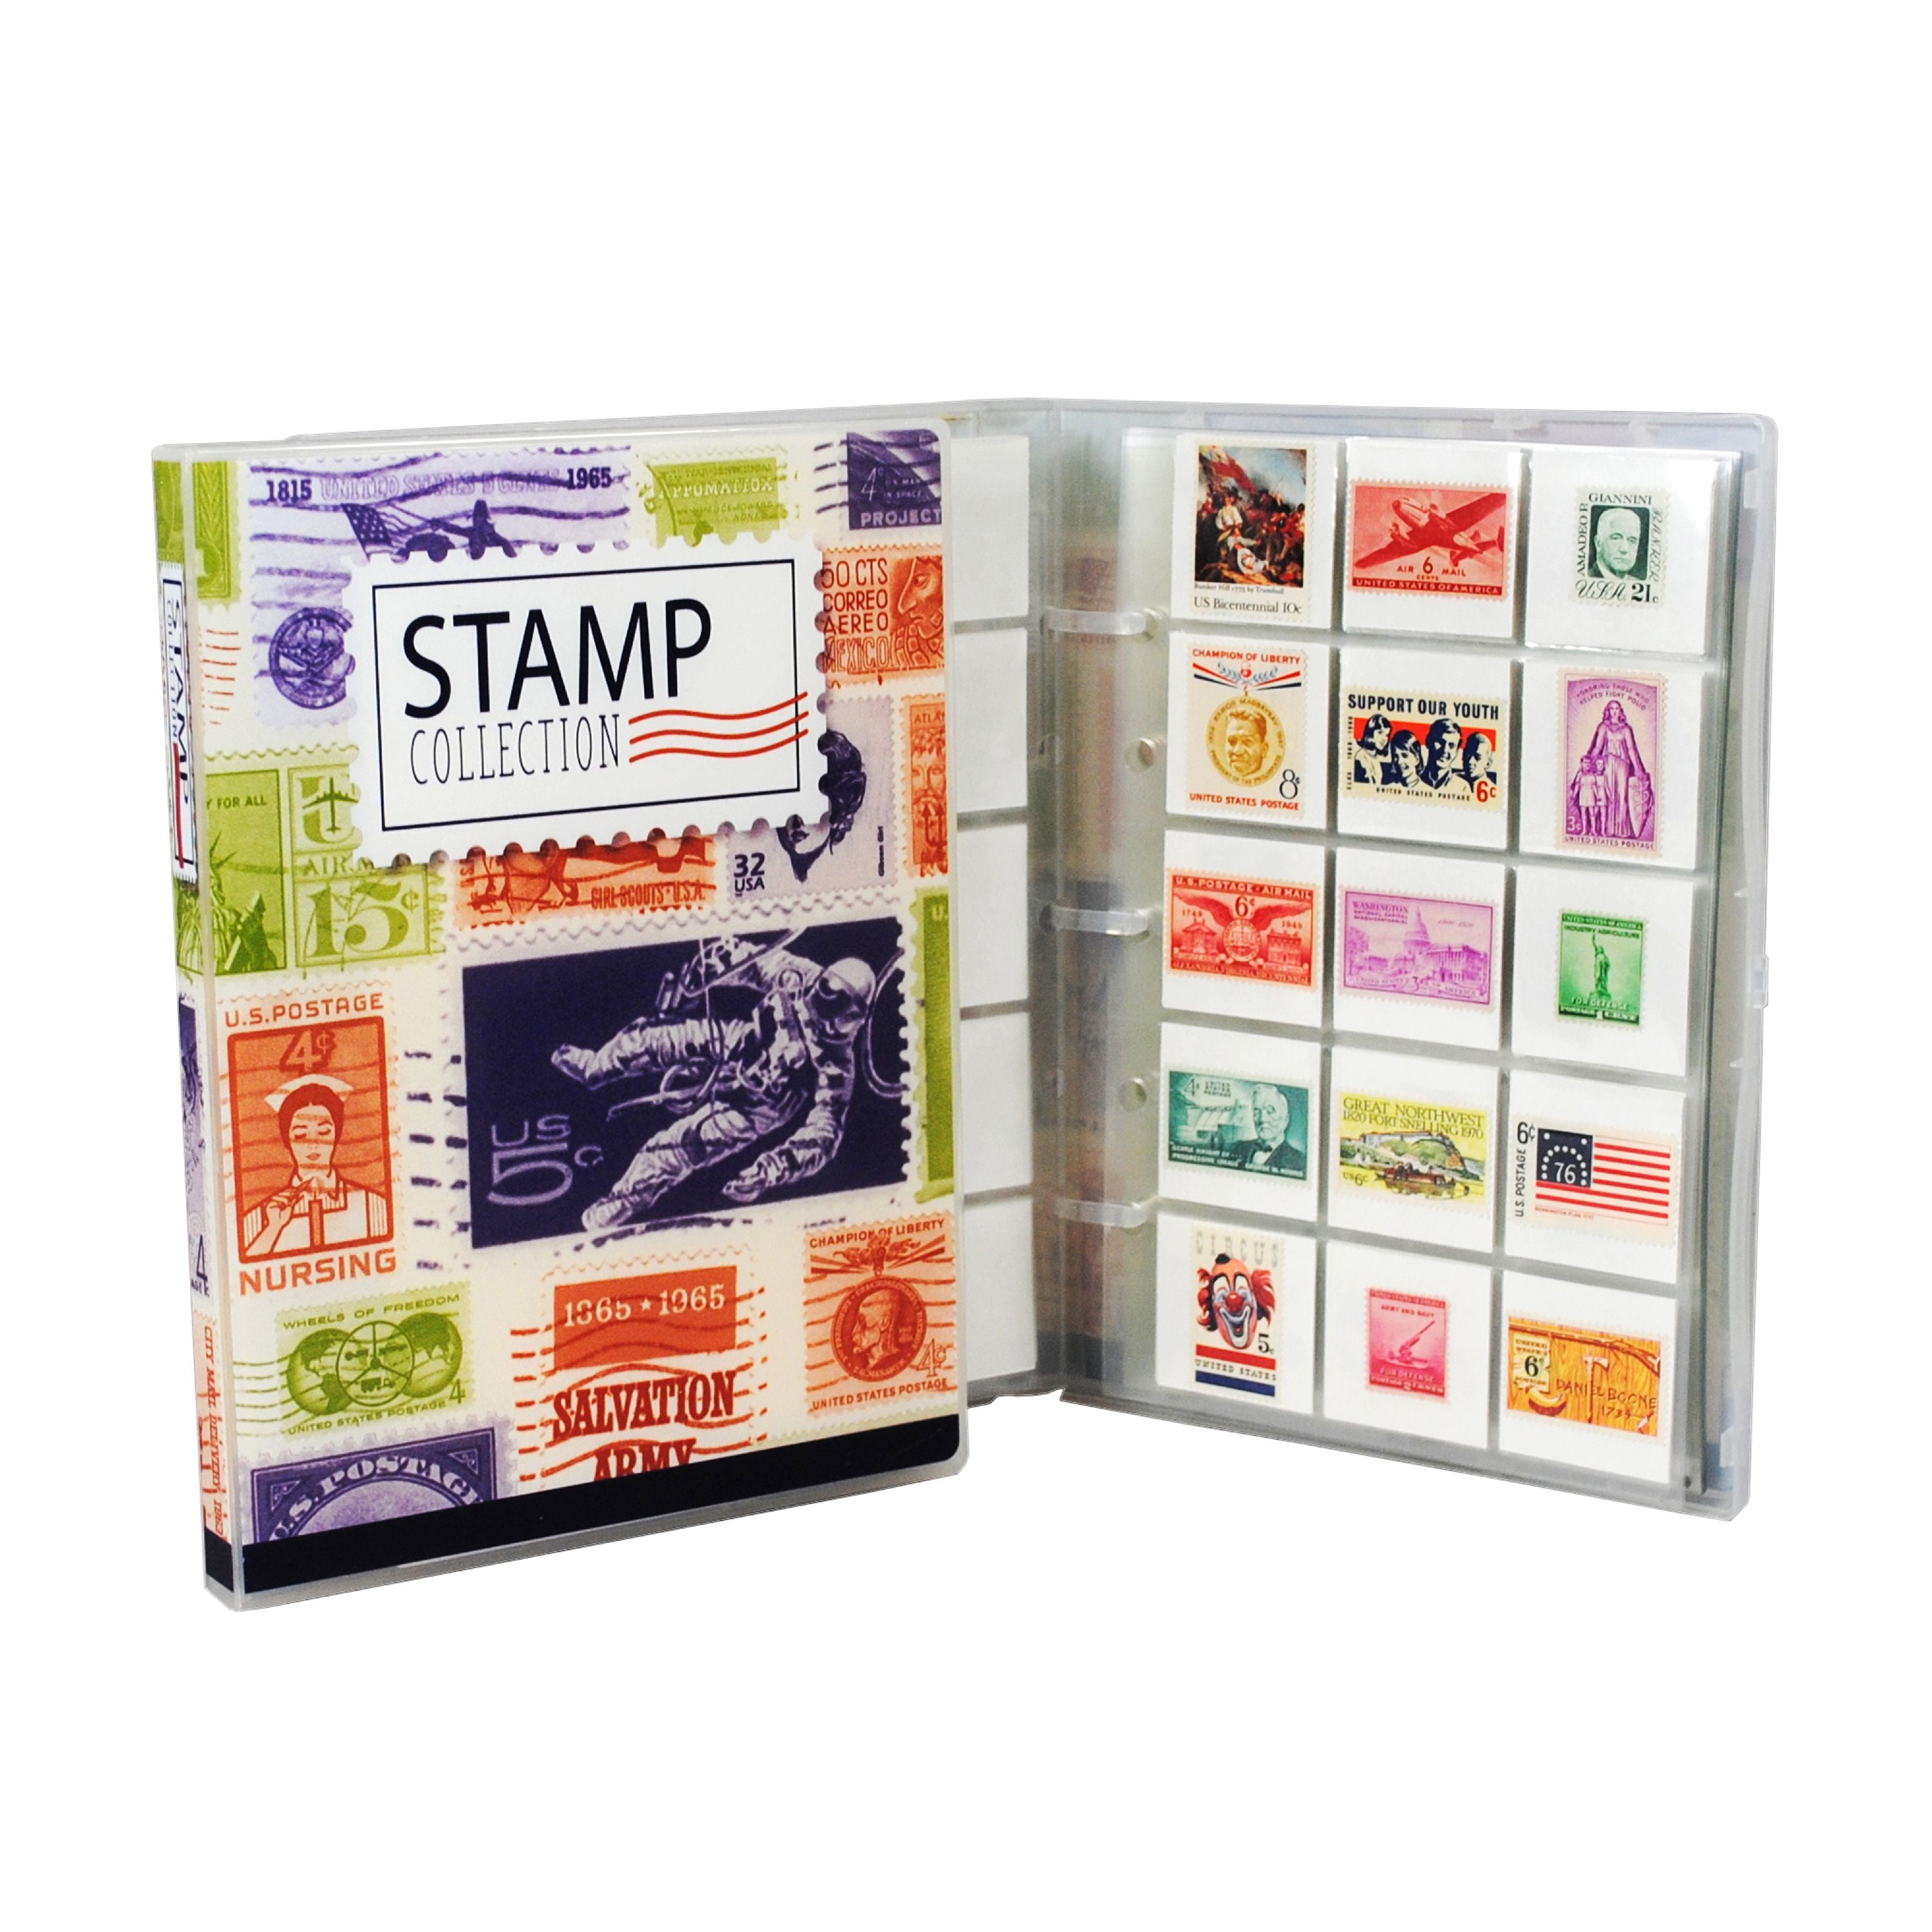 My Stamp Collection: Stamp Collecting Album for Stamp Collectors, 120 Pages, 8. 5 X 11 Inches